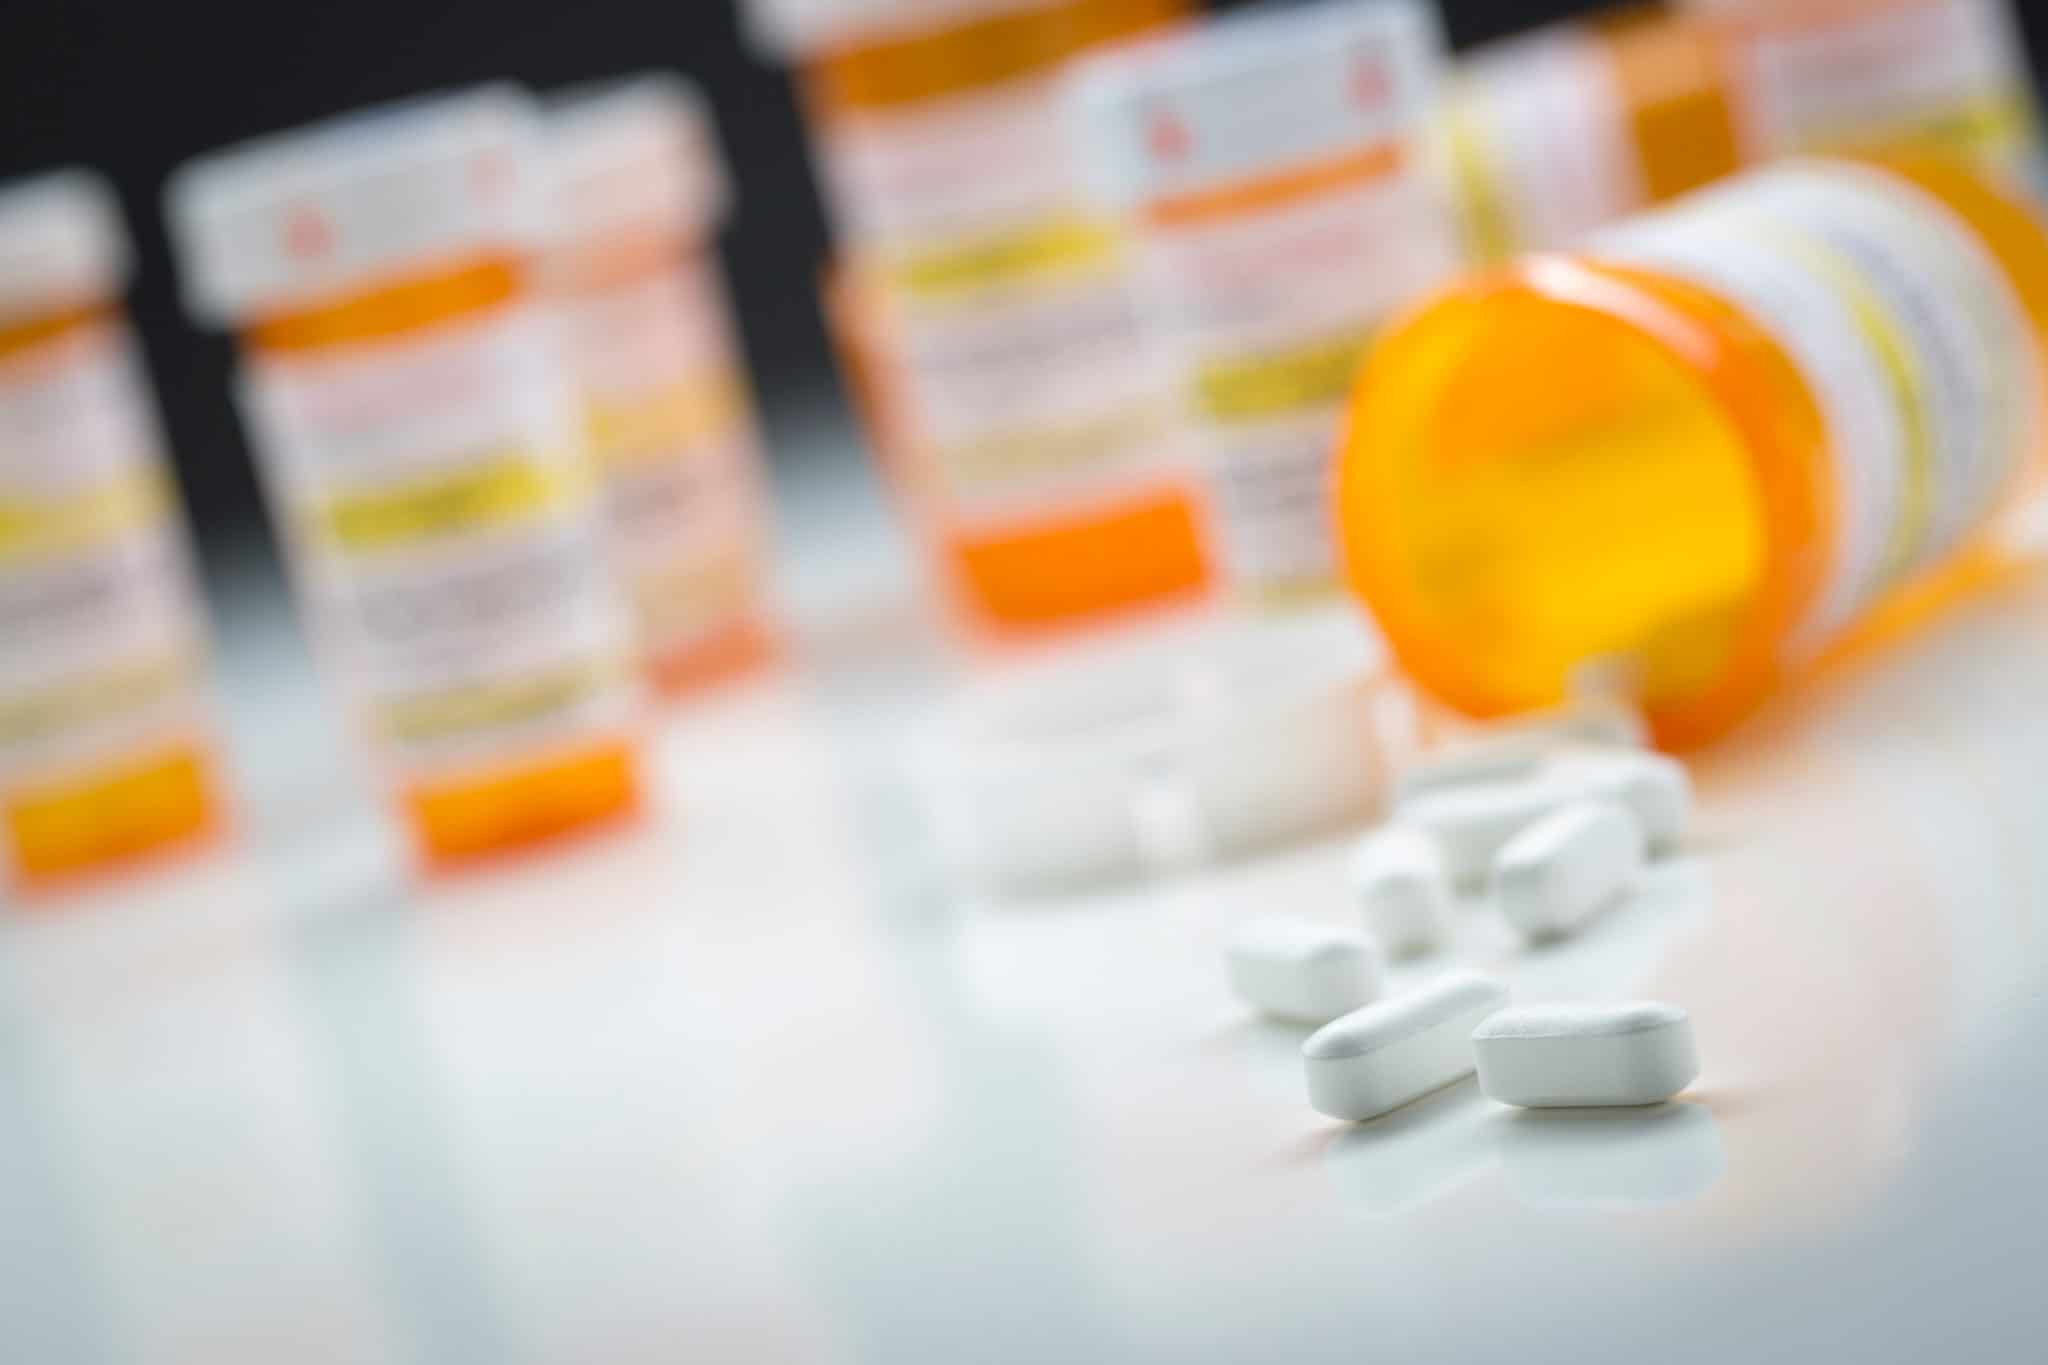 What You Need to Know About CO Prescription Fraud